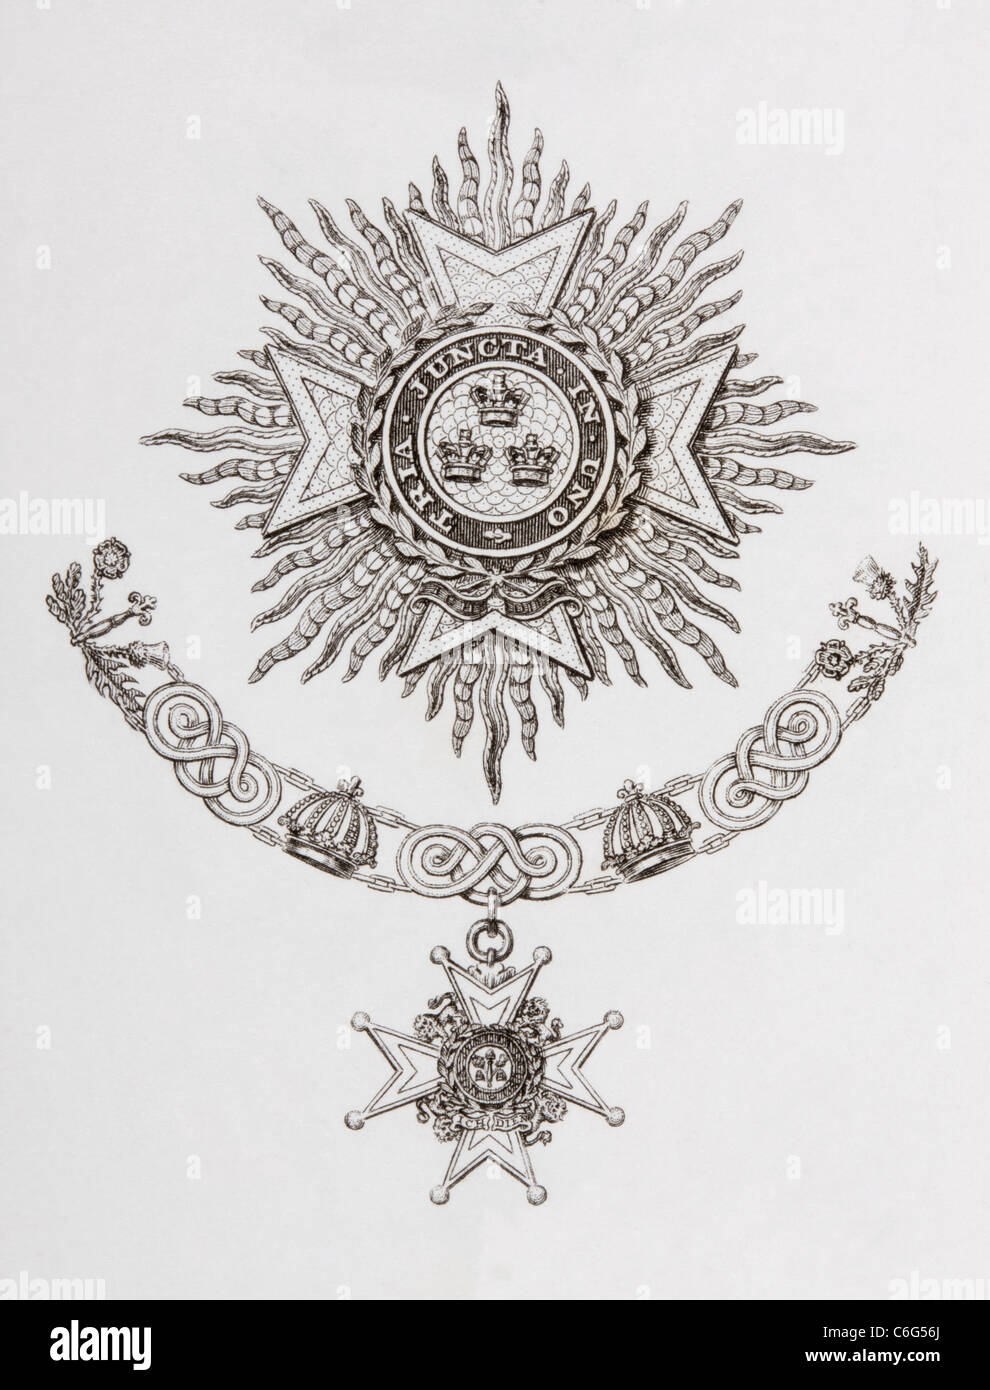 Star, Collar and Badge of a Military Knight Grand Cross of the Order of the Bath. Stock Photo